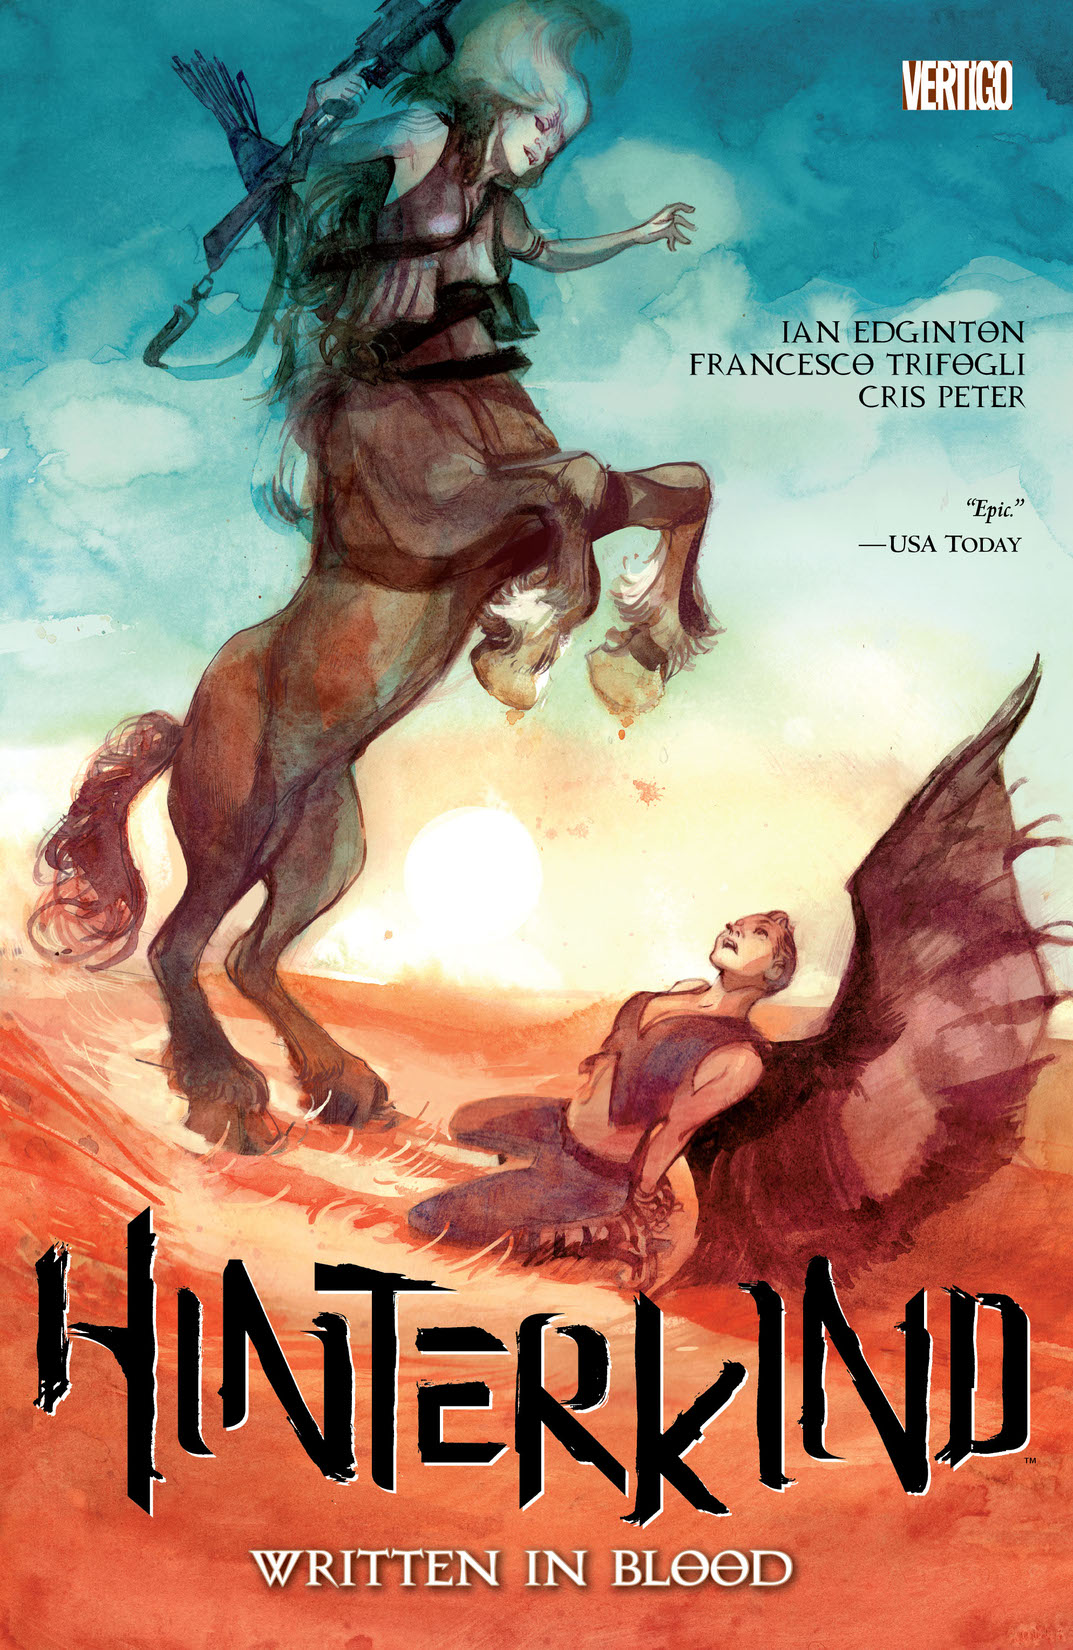 Hinterkind Vol. 2: Written in Blood preview images